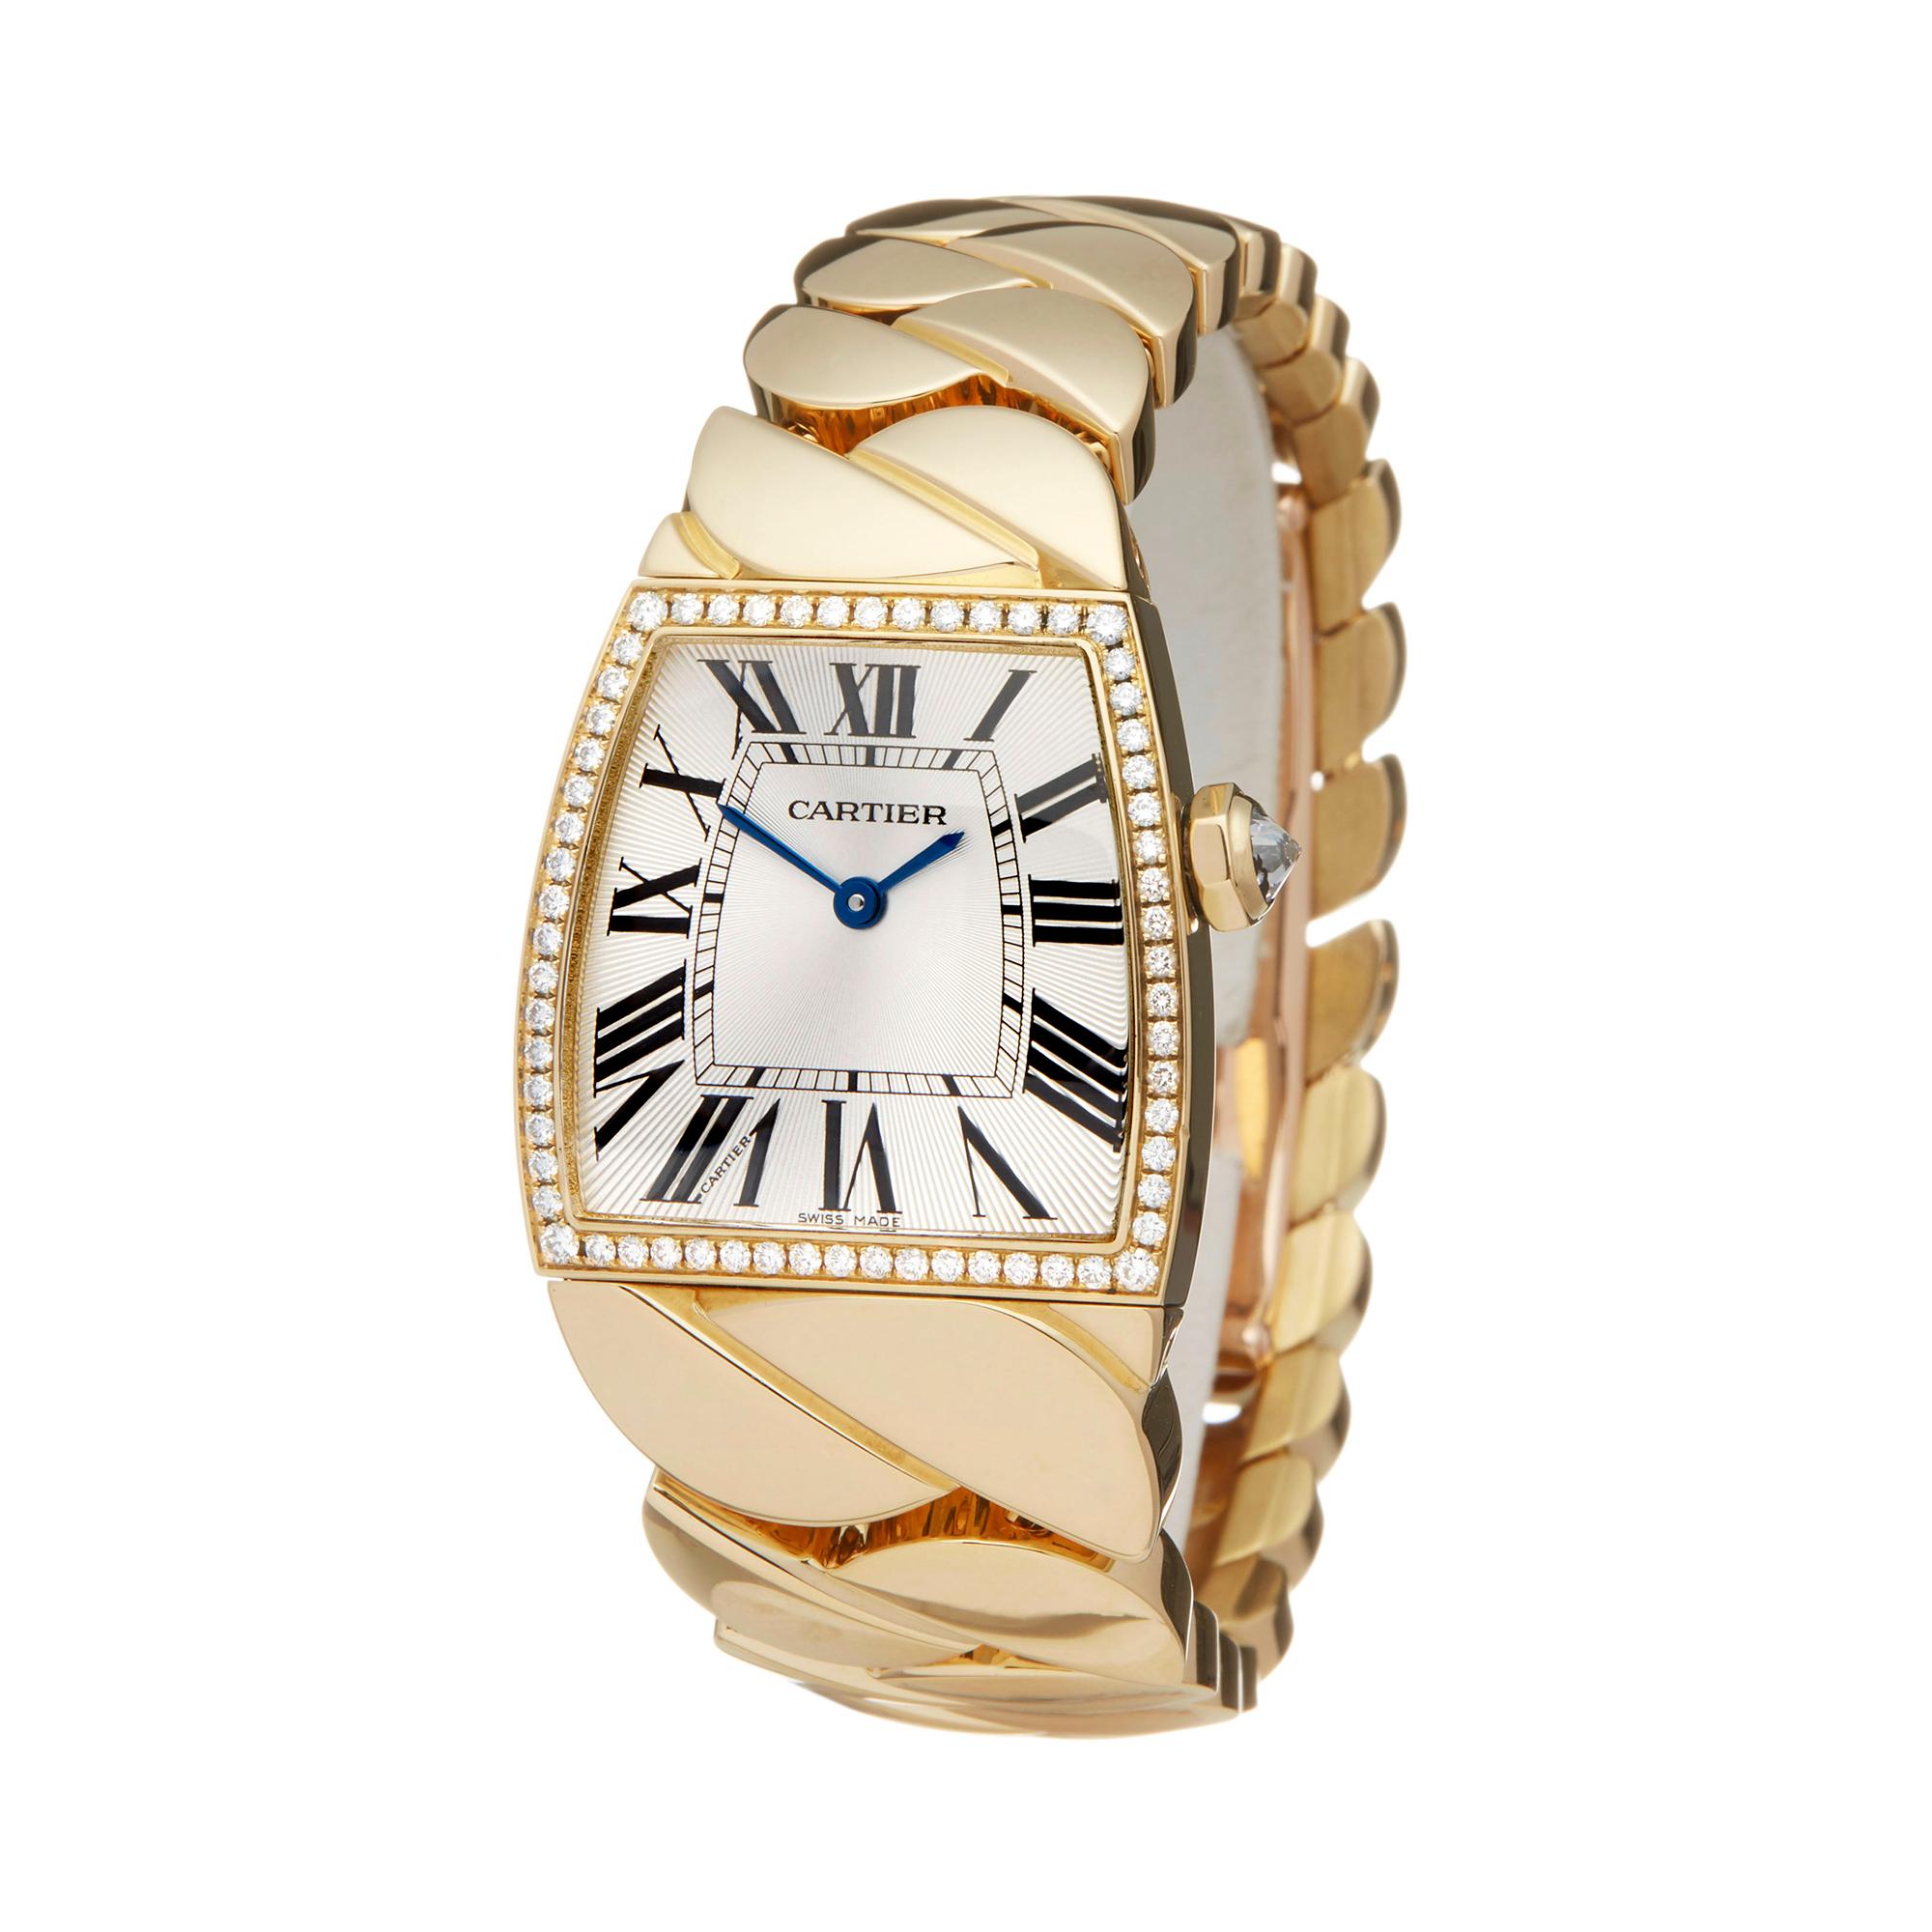 Reference: W6088
Manufacturer: Cartier
Model: La Dona
Model Reference: 9500
Age: Circa 2000's
Gender: Women's
Box and Papers: Box, Manuals and Open Guarantee
Dial: Silver Roman
Glass: Sapphire Crystal
Movement: Automatic
Water Resistance: To